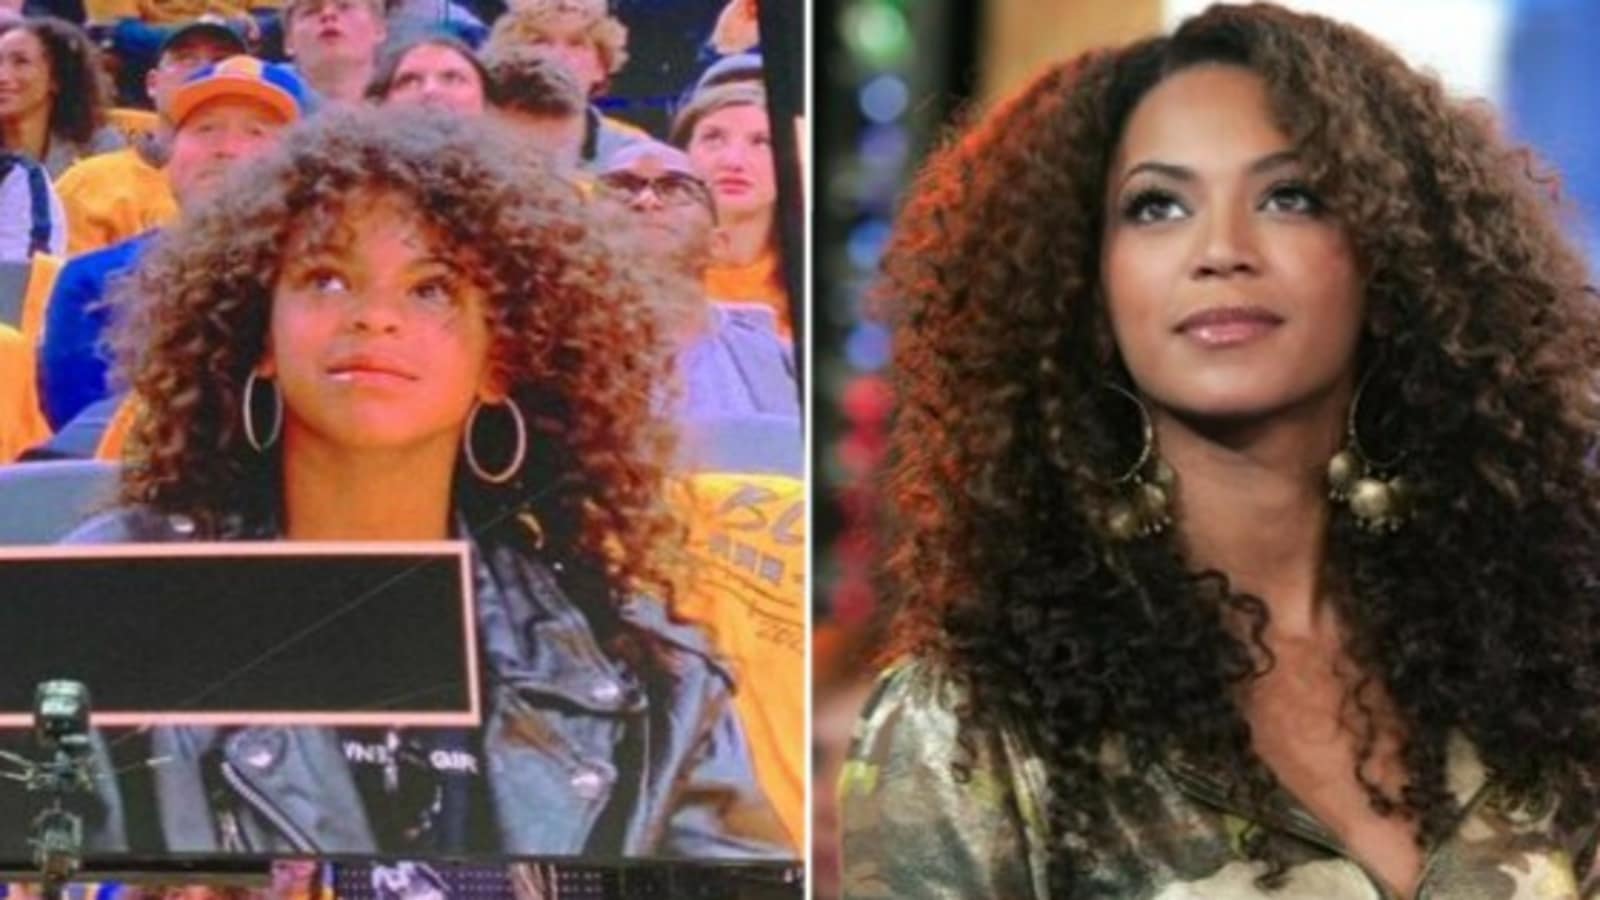 Beyoncé's daughter Blue Ivy is just her doppelganger at NBA game